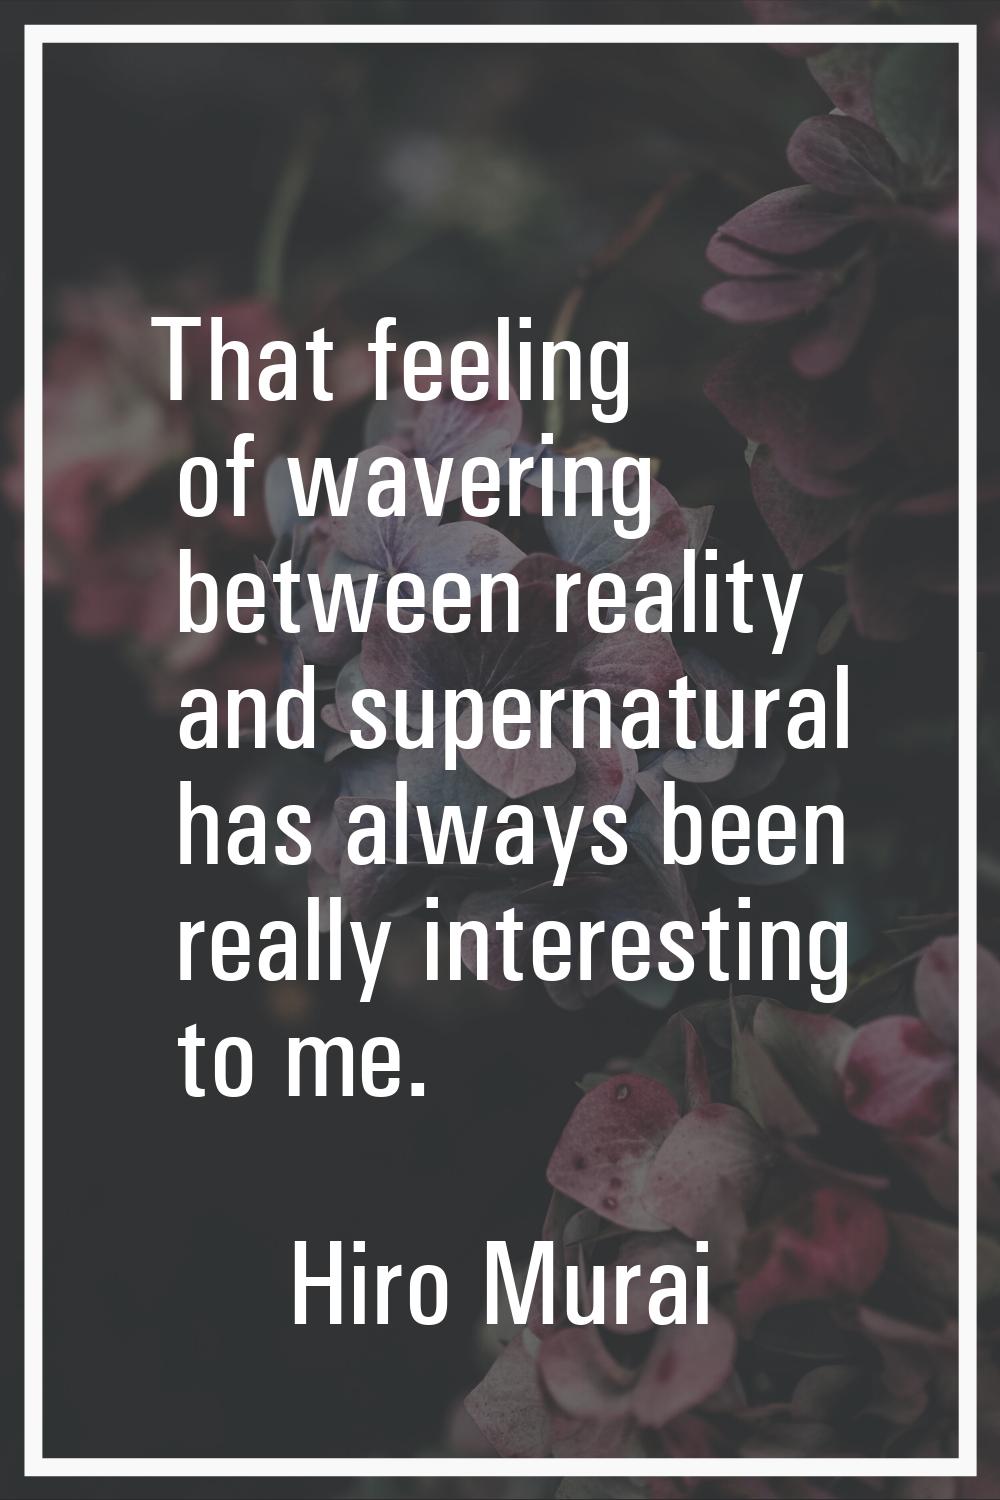 That feeling of wavering between reality and supernatural has always been really interesting to me.